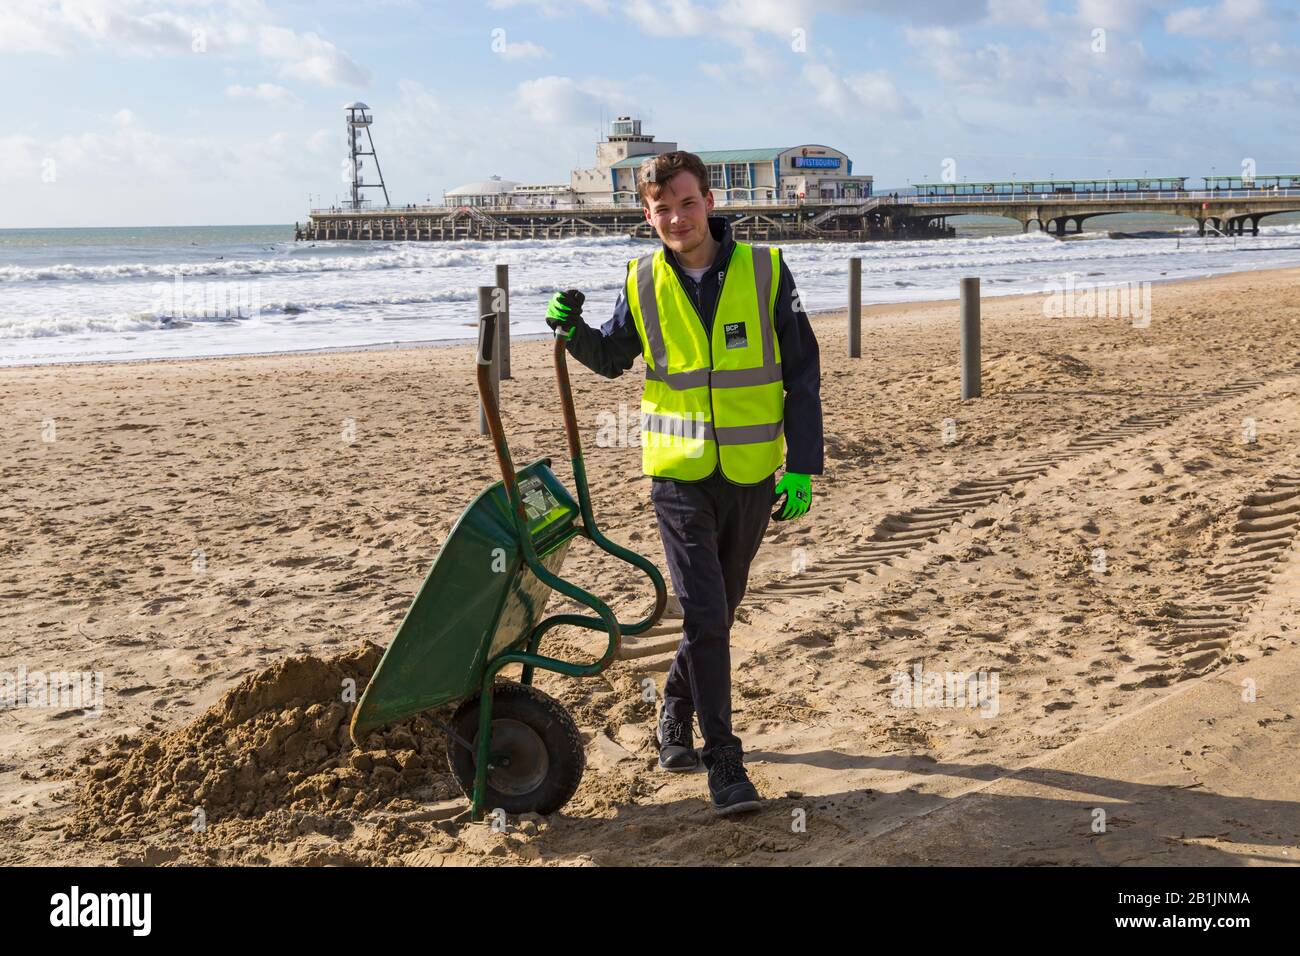 Bournemouth, Dorset, UK. 26th Feb 2020. Councillor Lewis Allison, gets stuck in and gives the seafront rangers a hand to clear the sand from the promenade, blown up from the recent strong winds and Storm Dennis.   Councillor Allison is Labour Councillor for Boscombe West and Portfolio Holder, Cabinet Member, for Tourism, Leisure and Communities at BCP (Bournemouth, Christchurch and Poole) Council.  Credit: Carolyn Jenkins/Alamy Live News Stock Photo